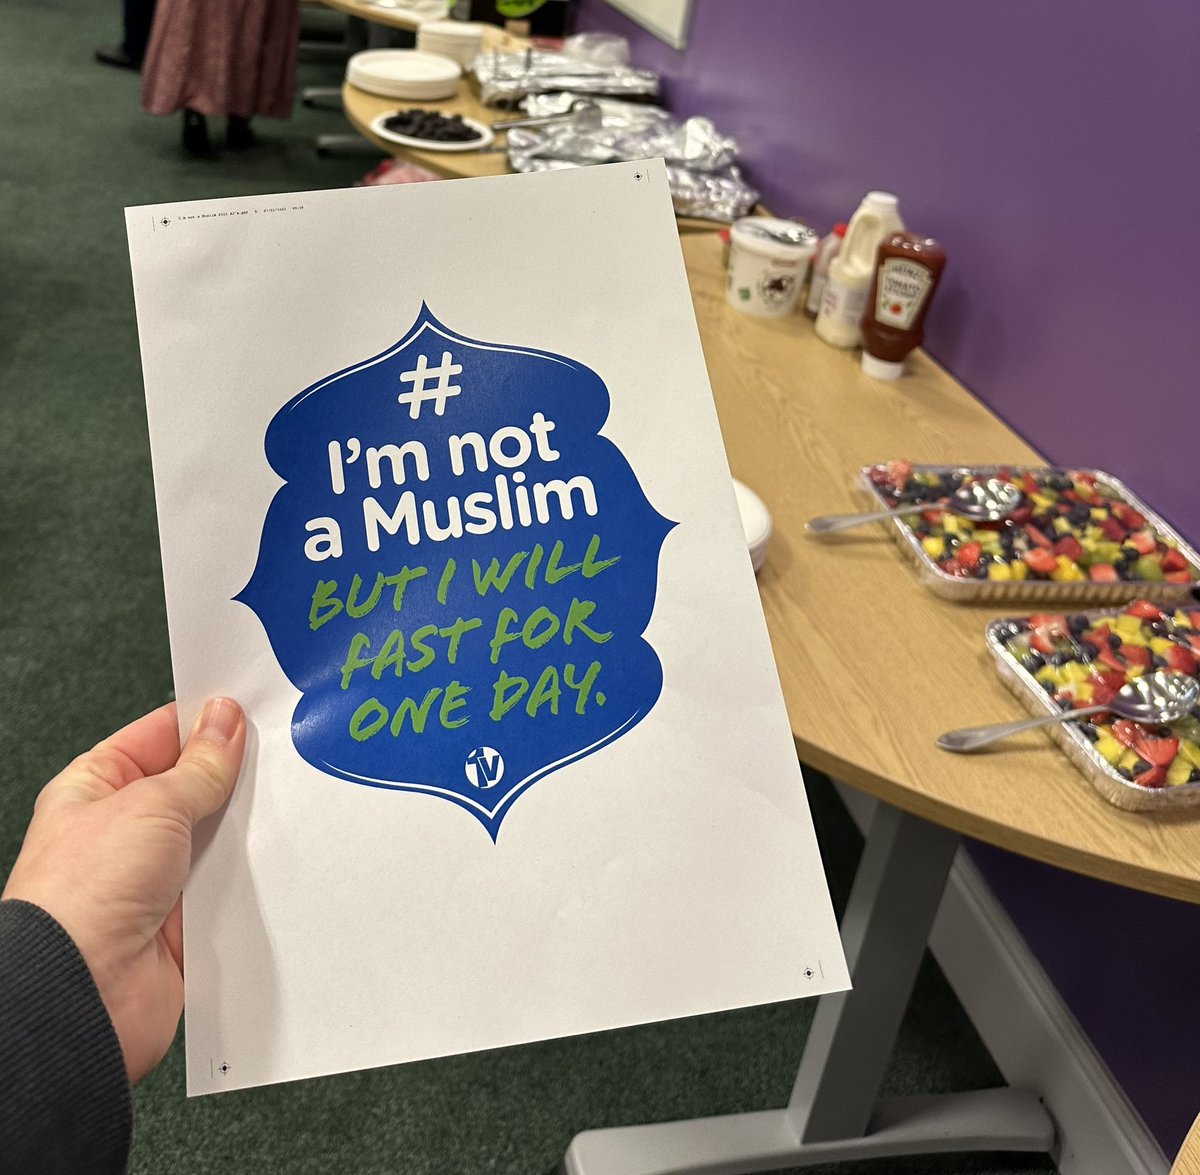 A hugely enjoyable evening breaking today’s fast with @elhtfinance Muslim colleagues and getting to know other @ELHT_NHS  colleagues in the process #imnotamuslimbutiwillfastforoneday